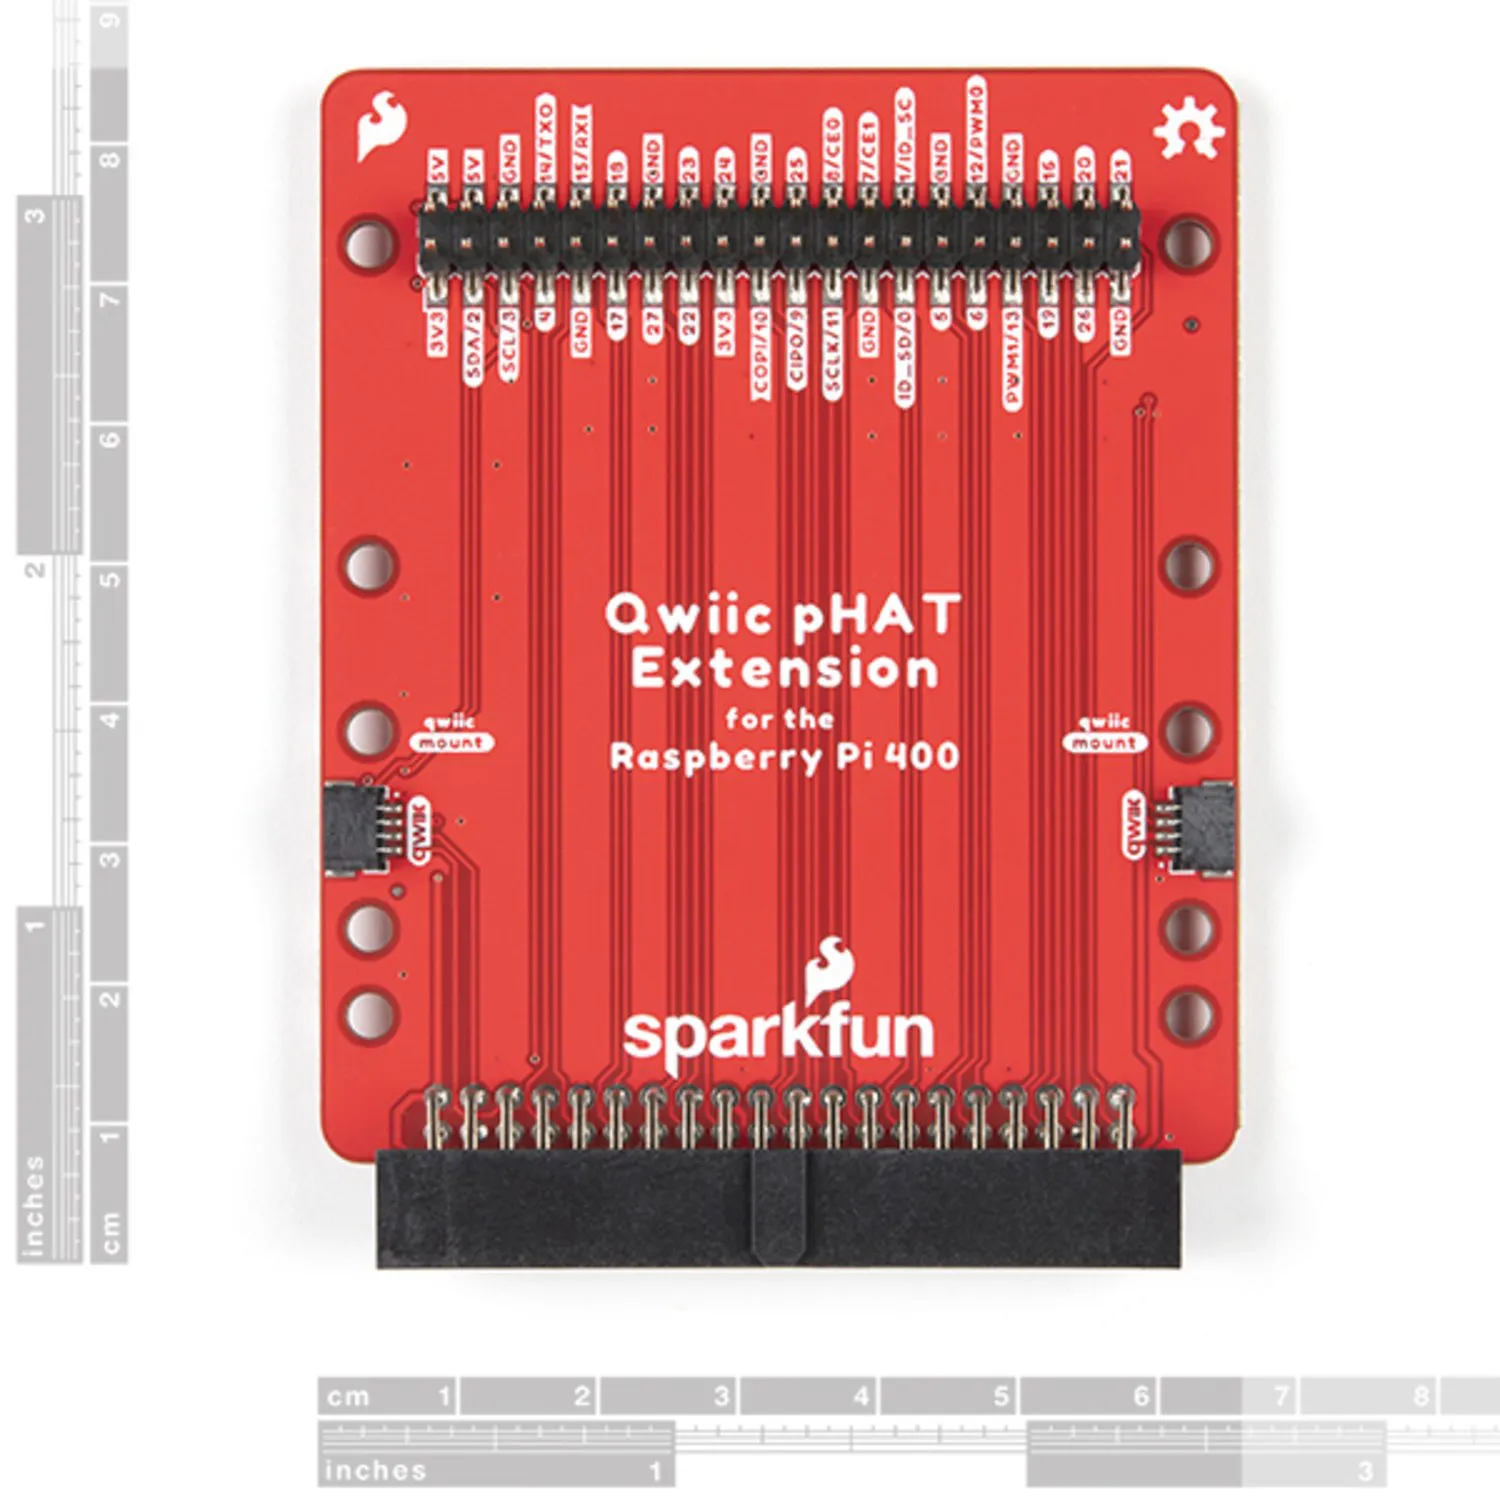 Photo of SparkFun Qwiic pHAT Extension for Raspberry Pi 400